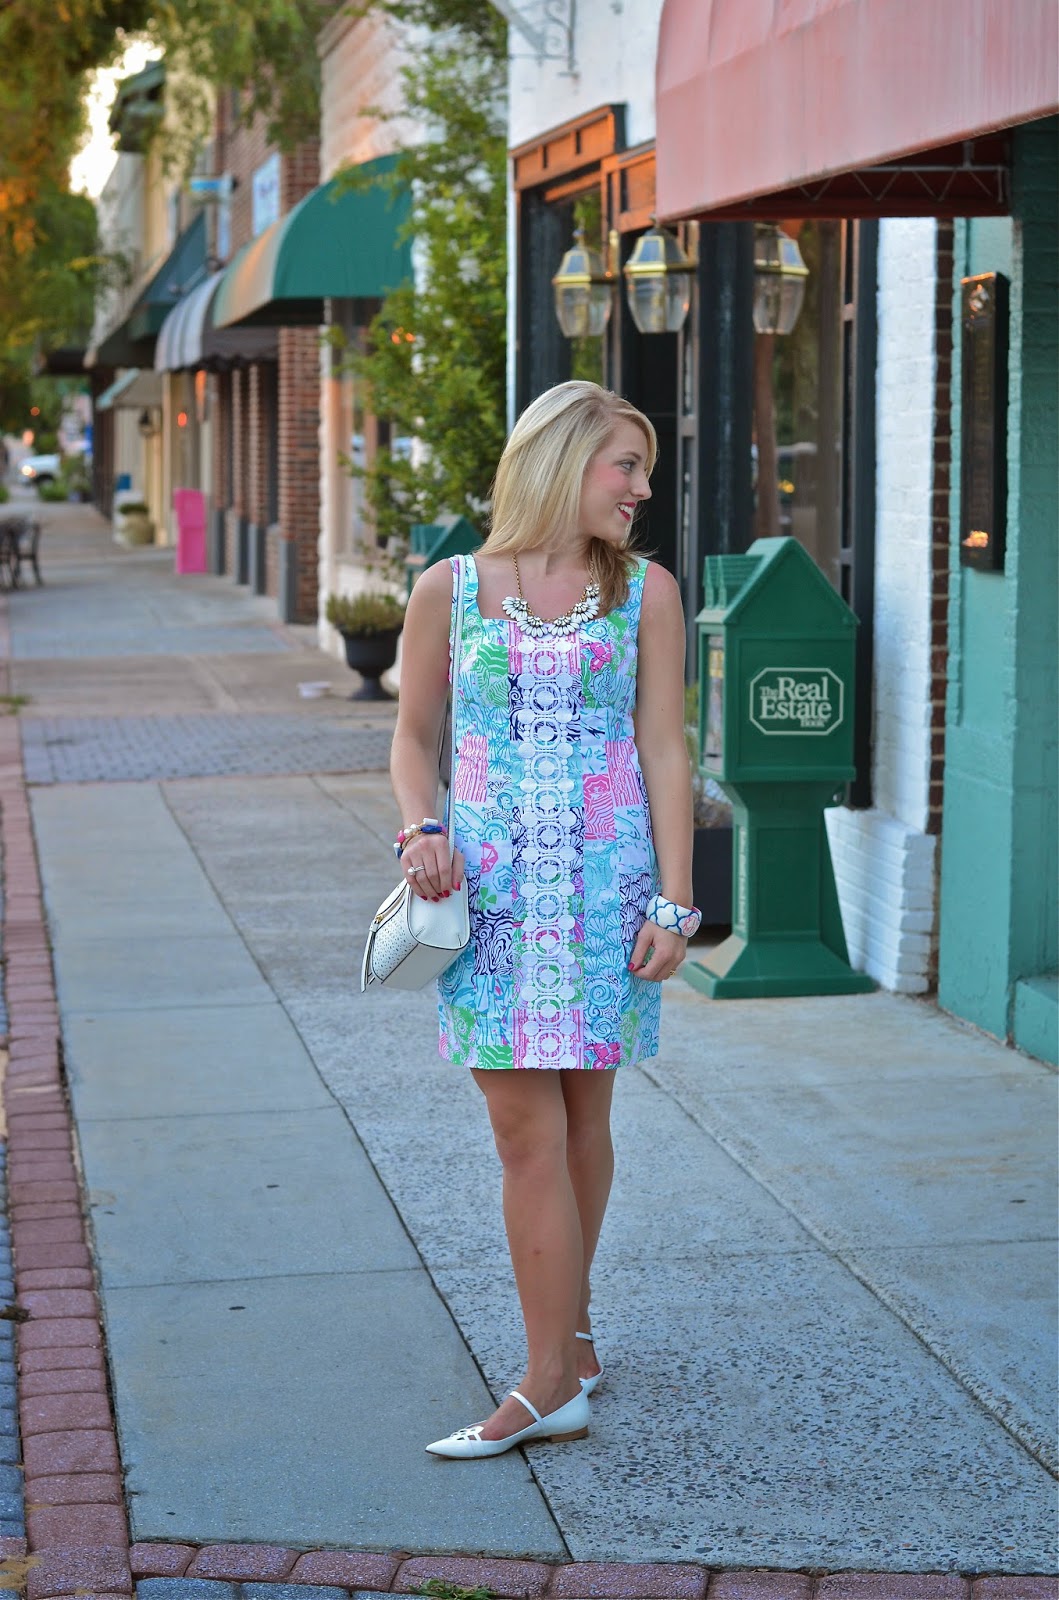 National Wear Your Lilly Day!